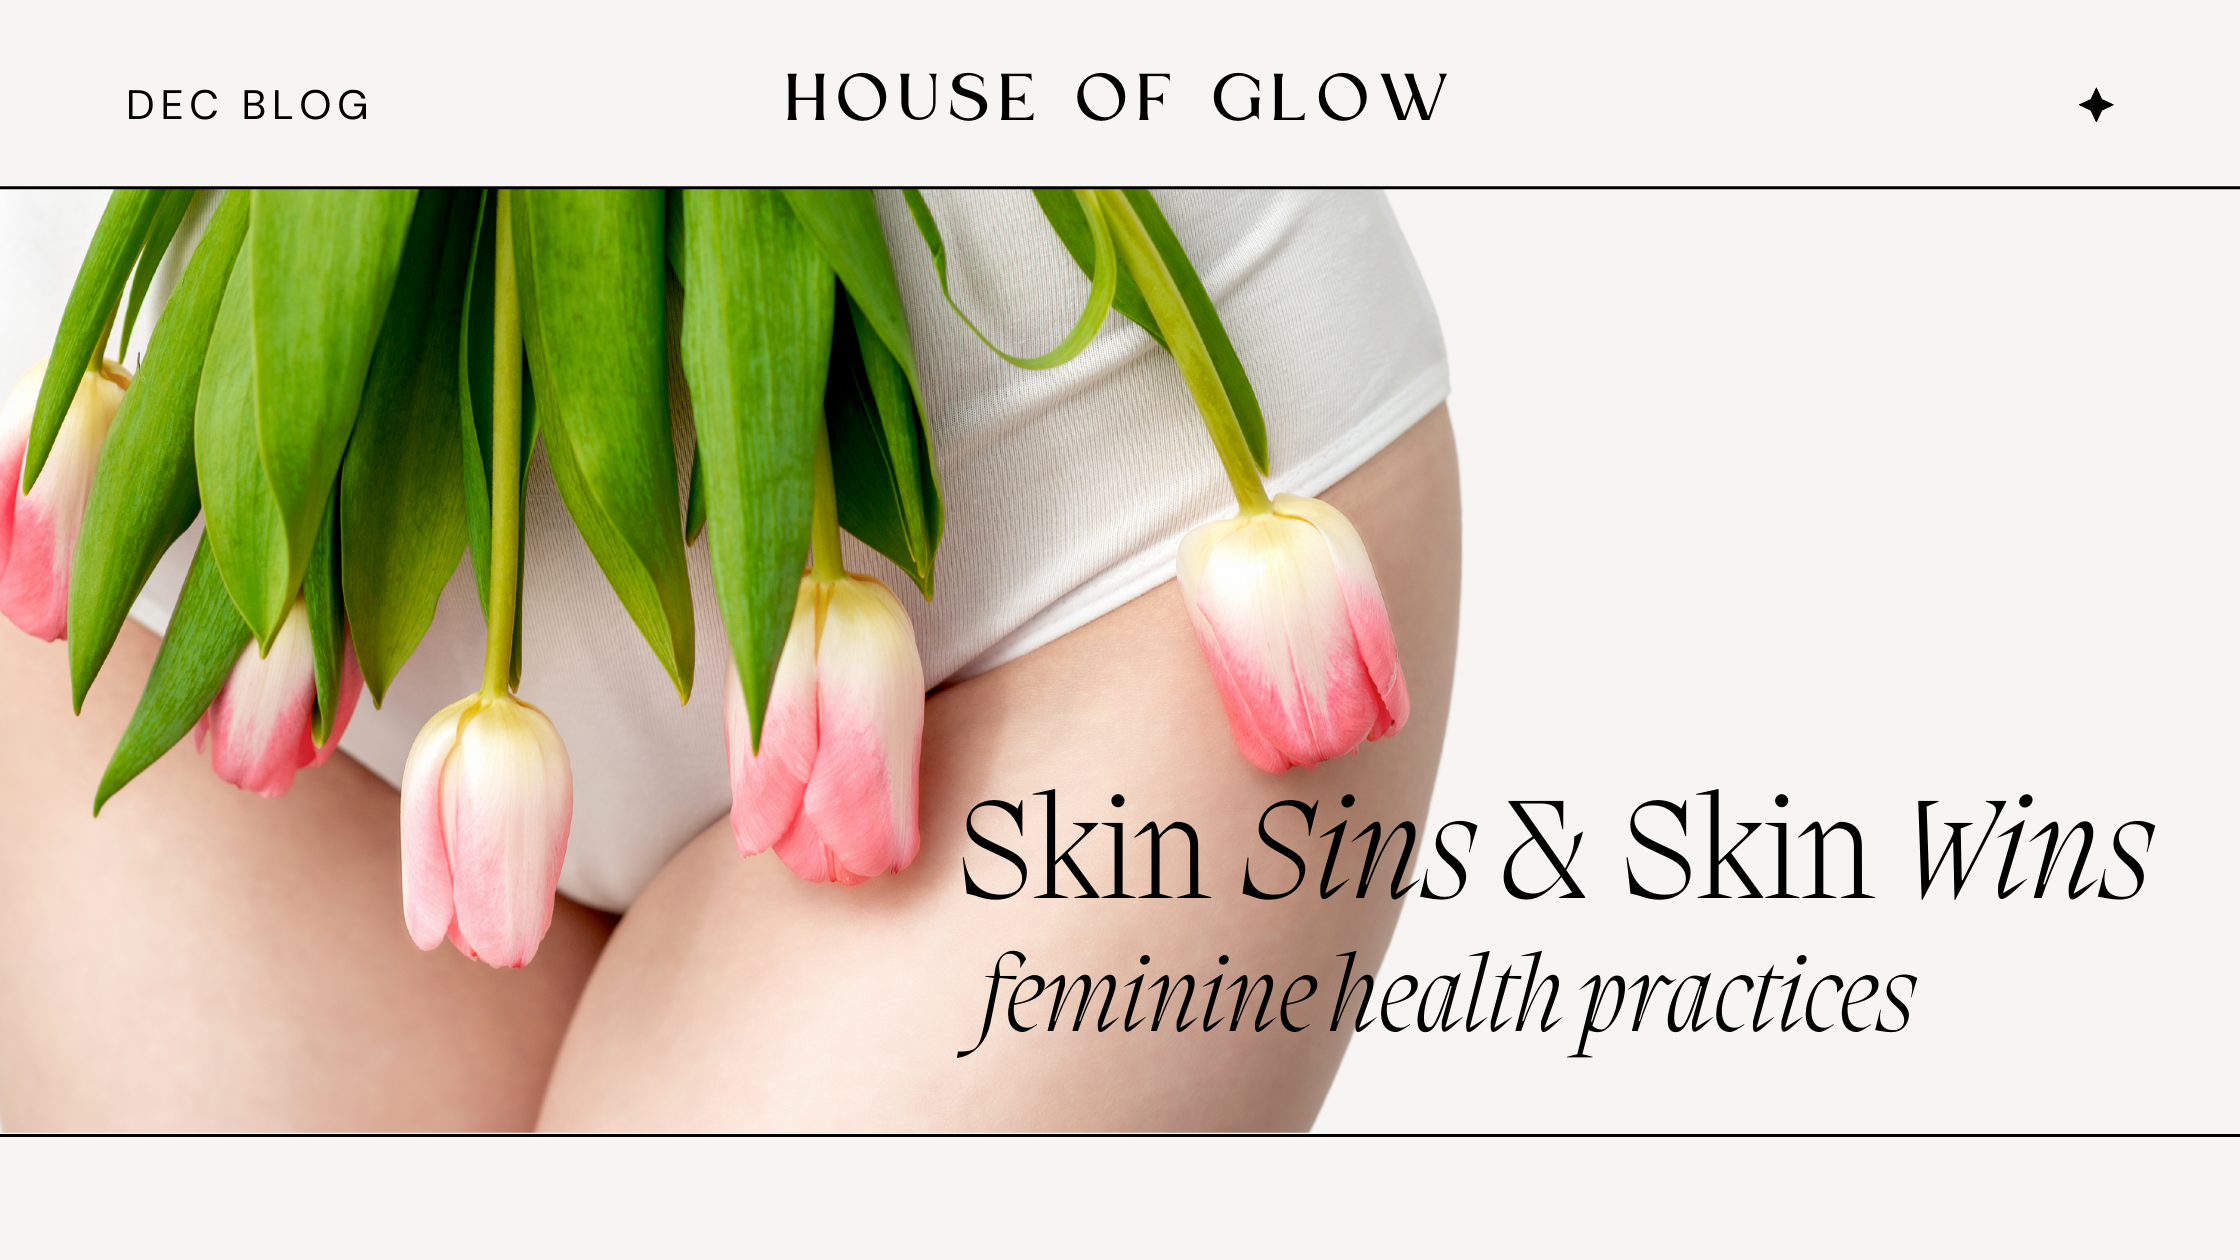 Skin Wins and Skin Sins: Navigating Feminine Health Practices, Products, and Treatments